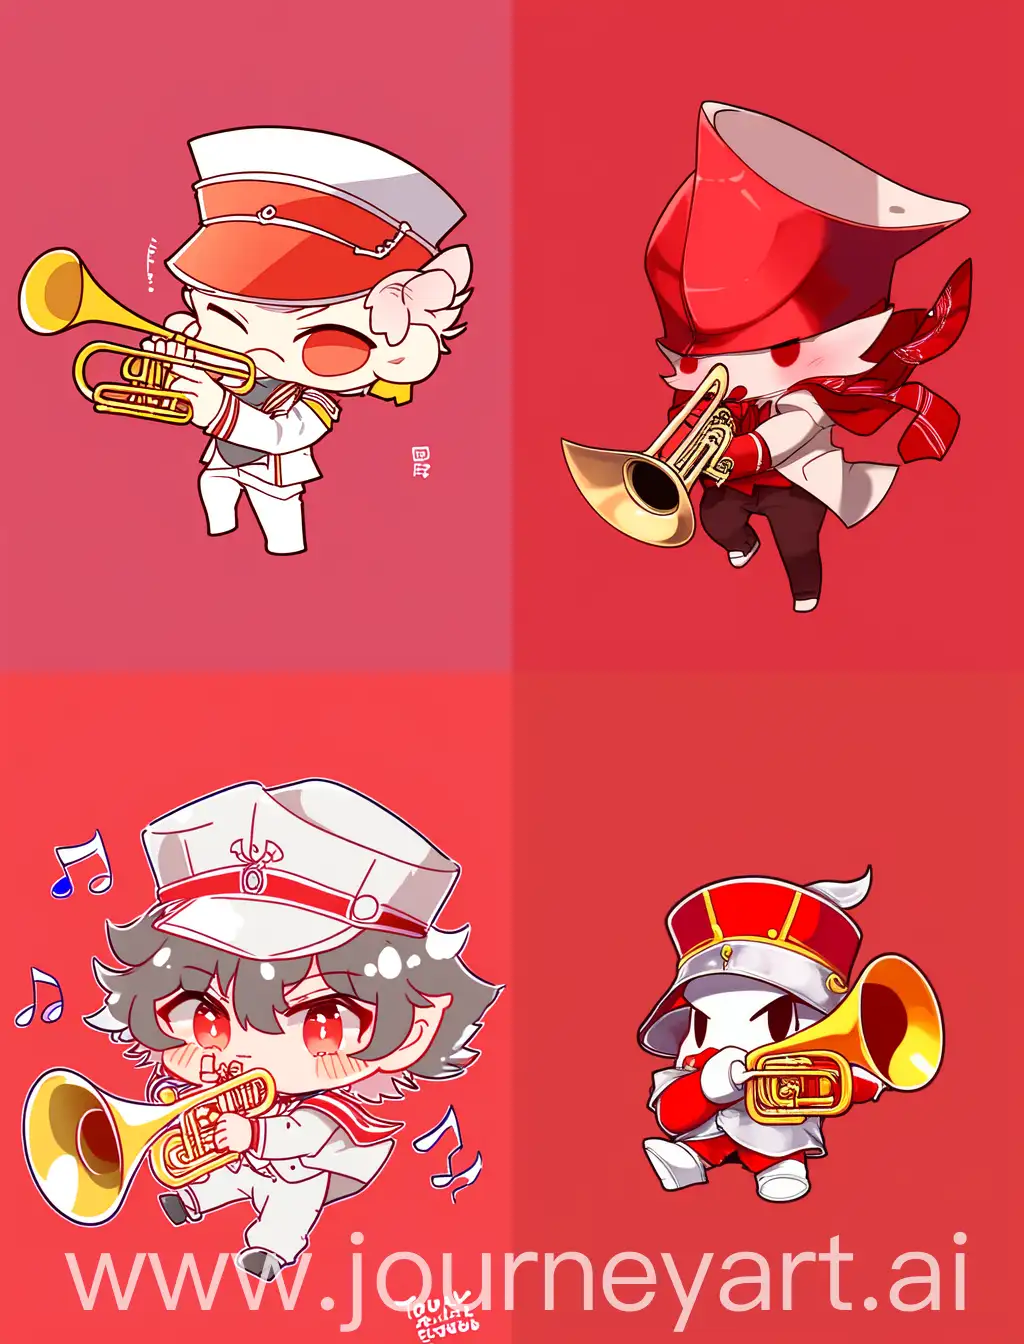 Chibi-Anime-Guy-Playing-Trumpet-on-Vibrant-Red-Background